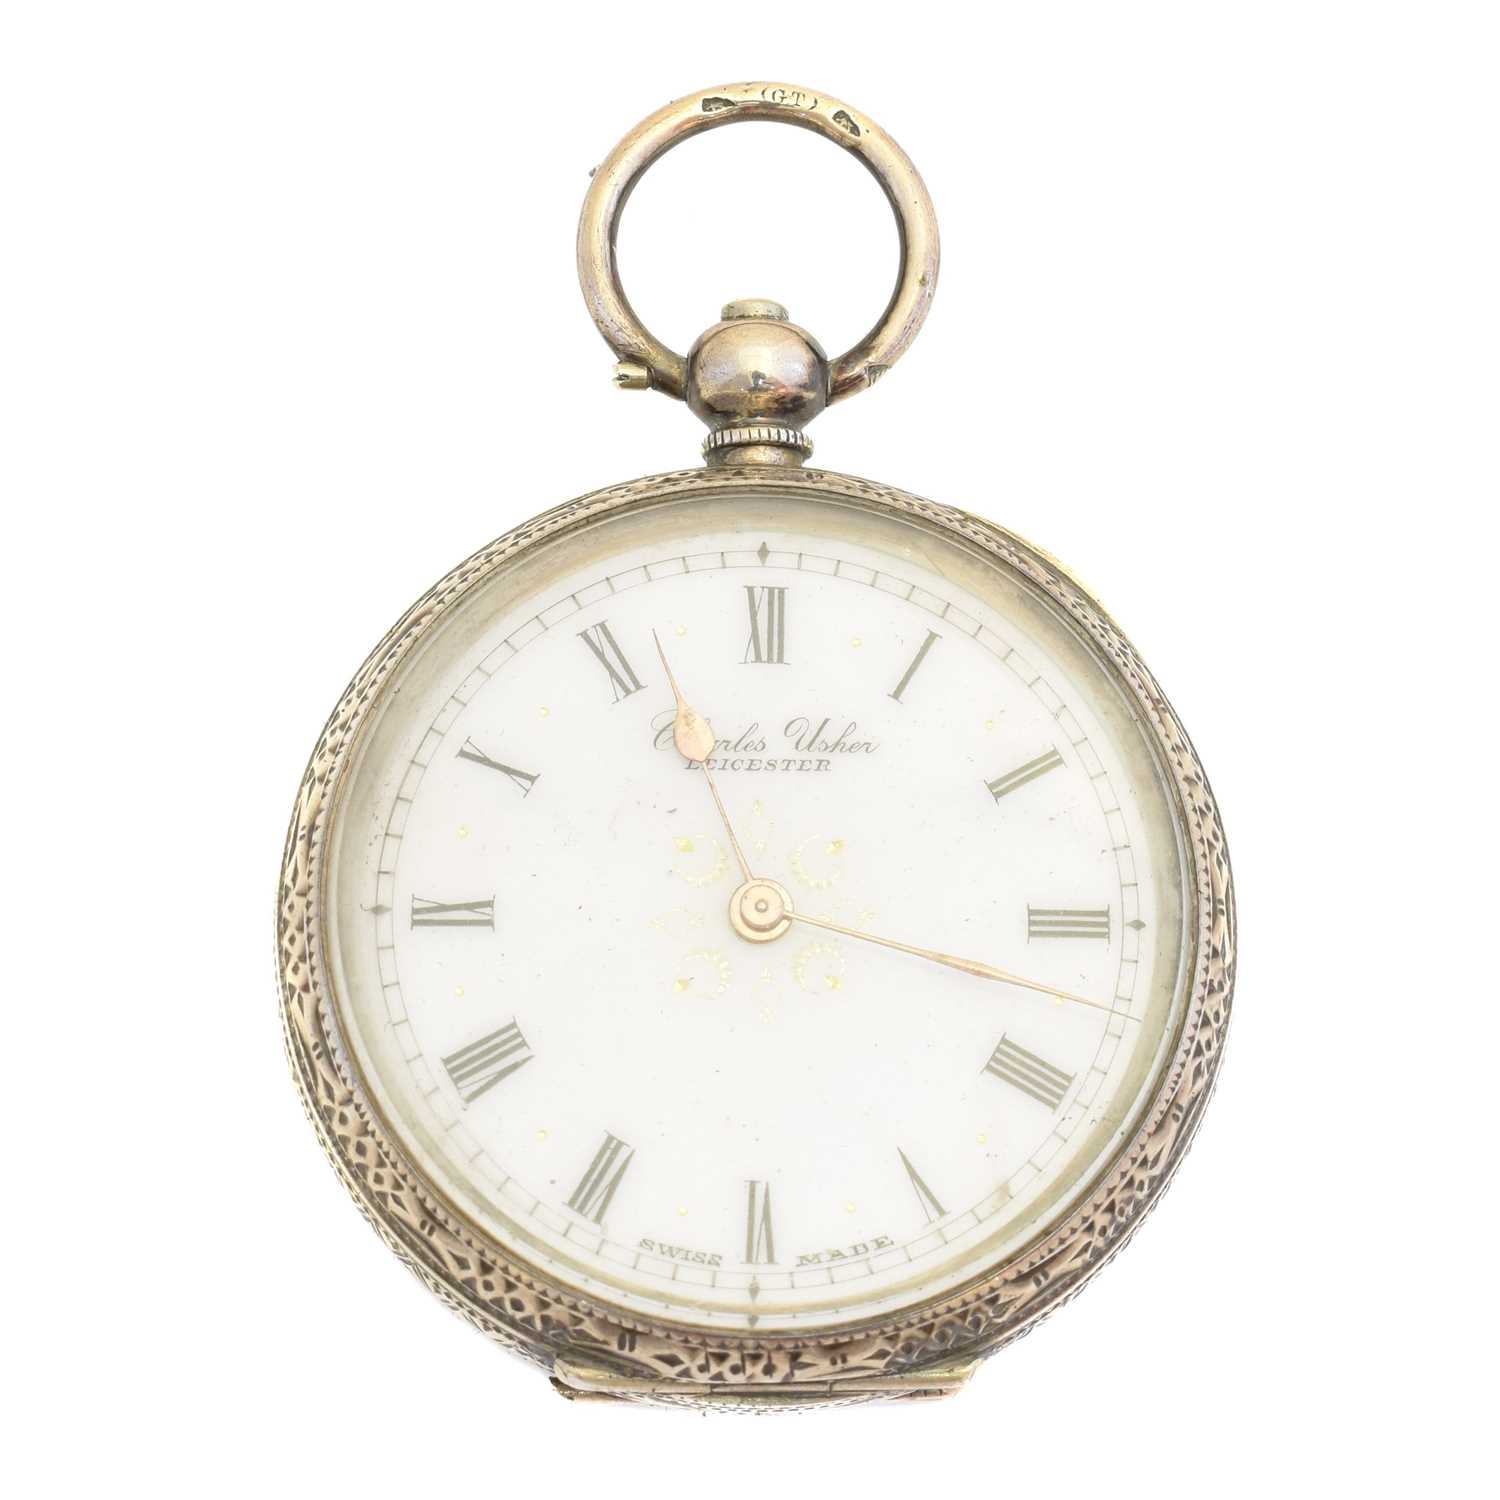 Lot 78 - A silver open face pocket watch by Charles Usher, Leicester